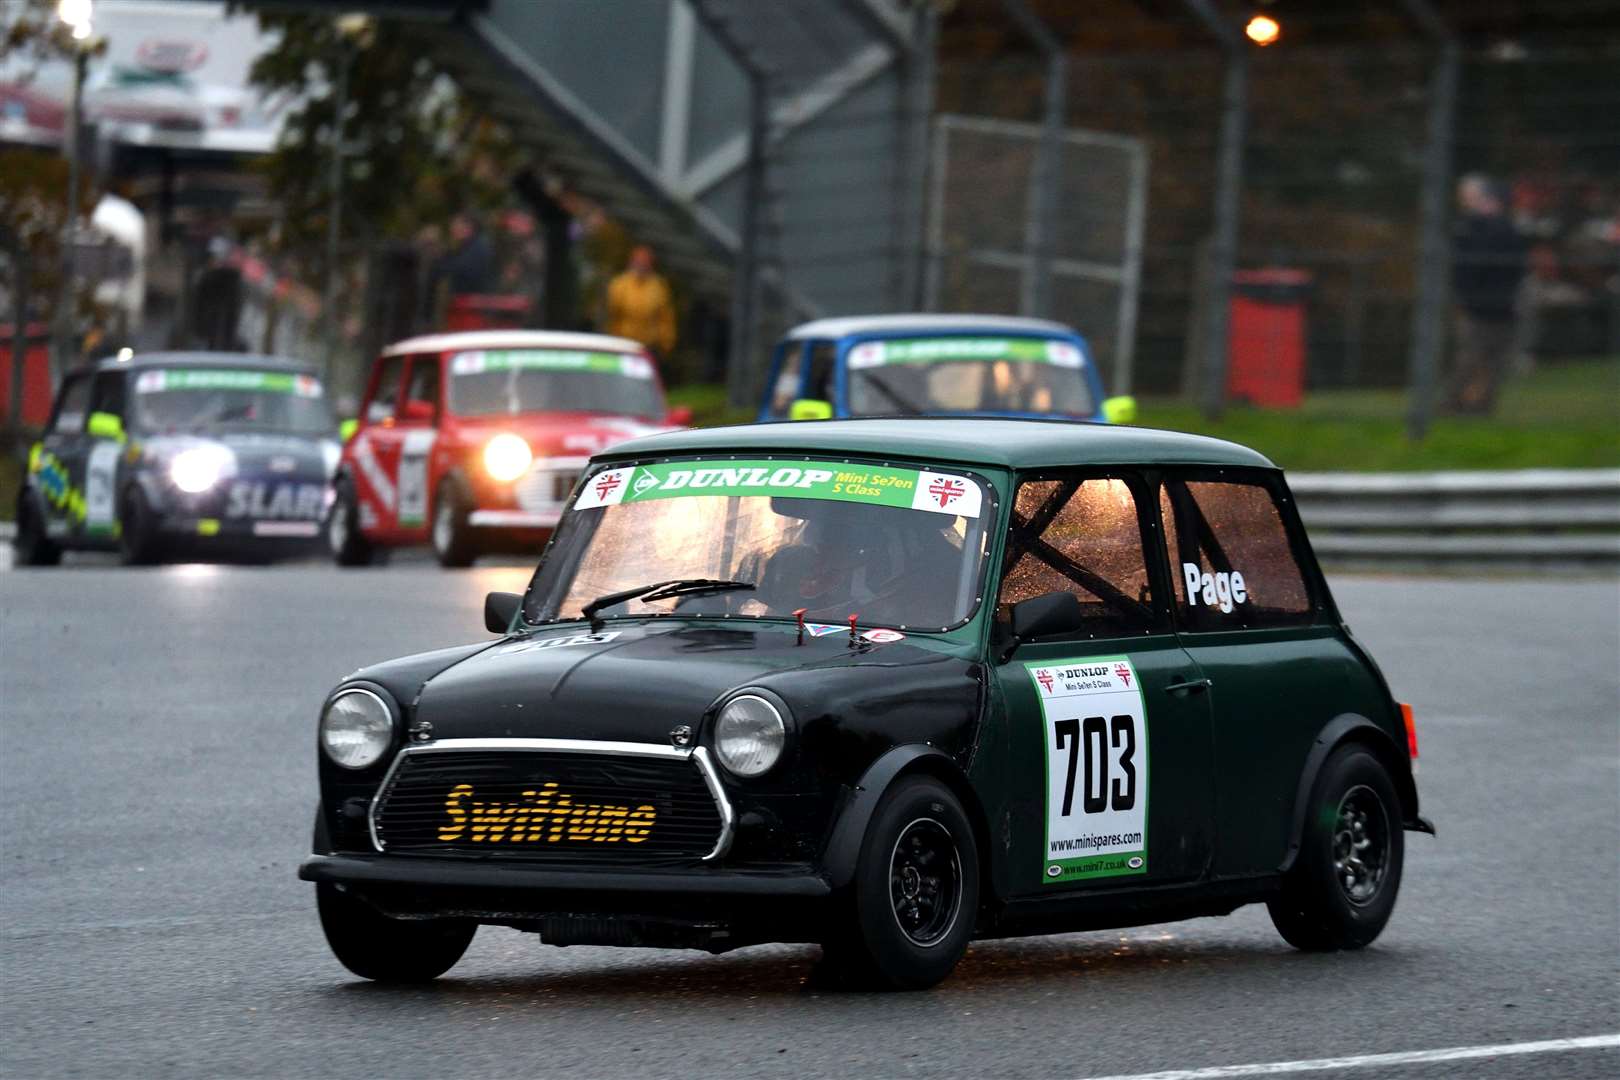 Matthew Page, from Cranbrook, finished a best of second in class in the Dunlop Mini Winter Challenge in his Mini Se7en